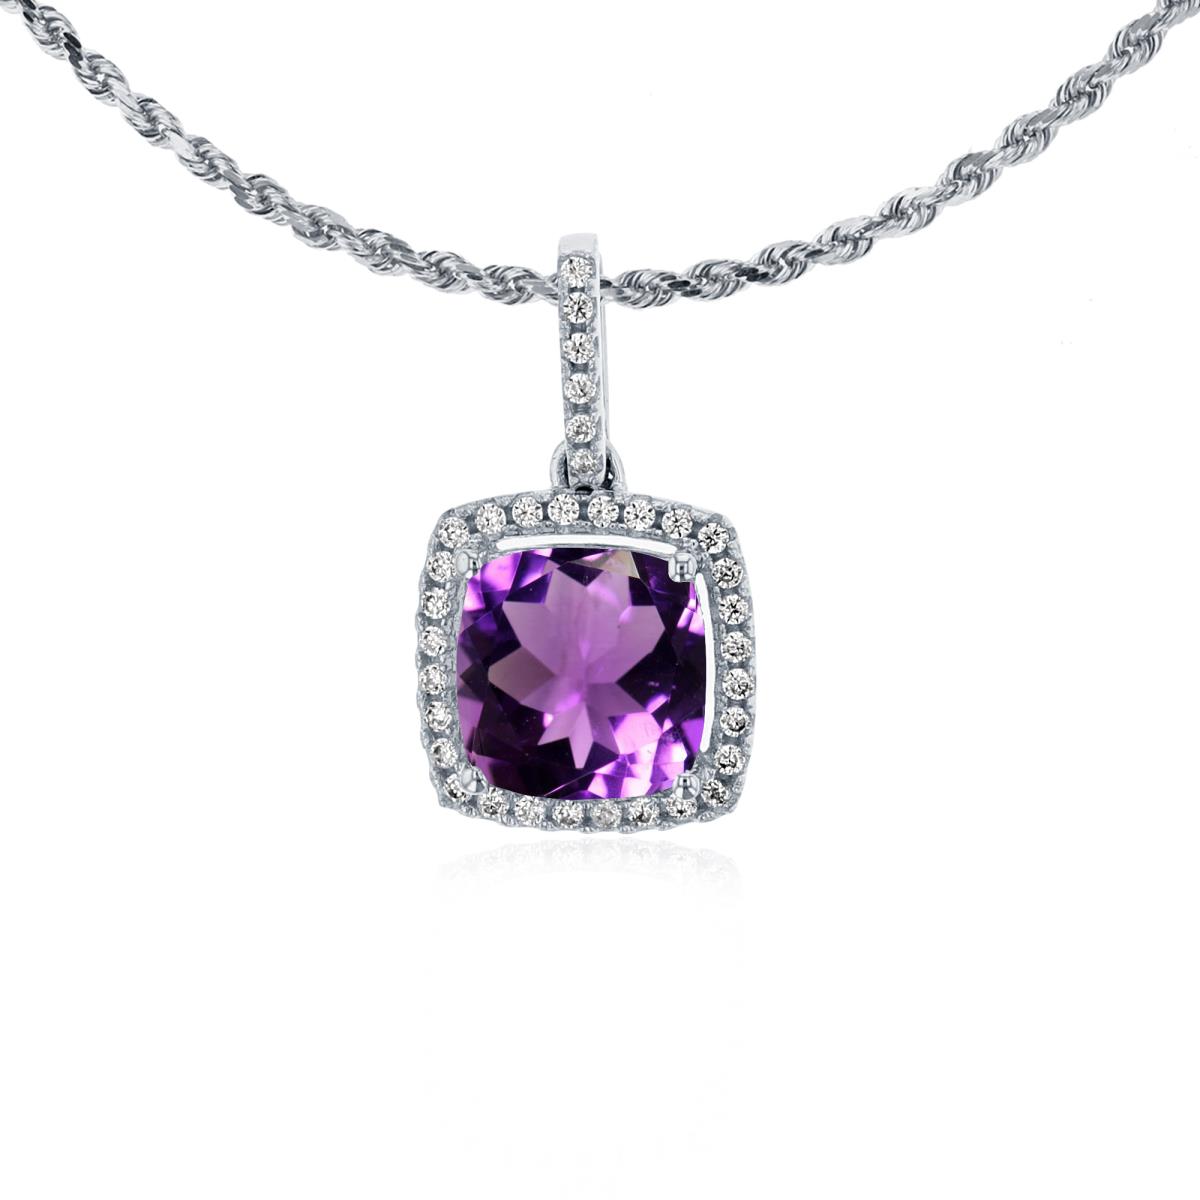 10K White Gold 7mm Cushion Amethyst & 0.14 CTTW Rnd Diamond Halo 18" Rope Chain Necklace